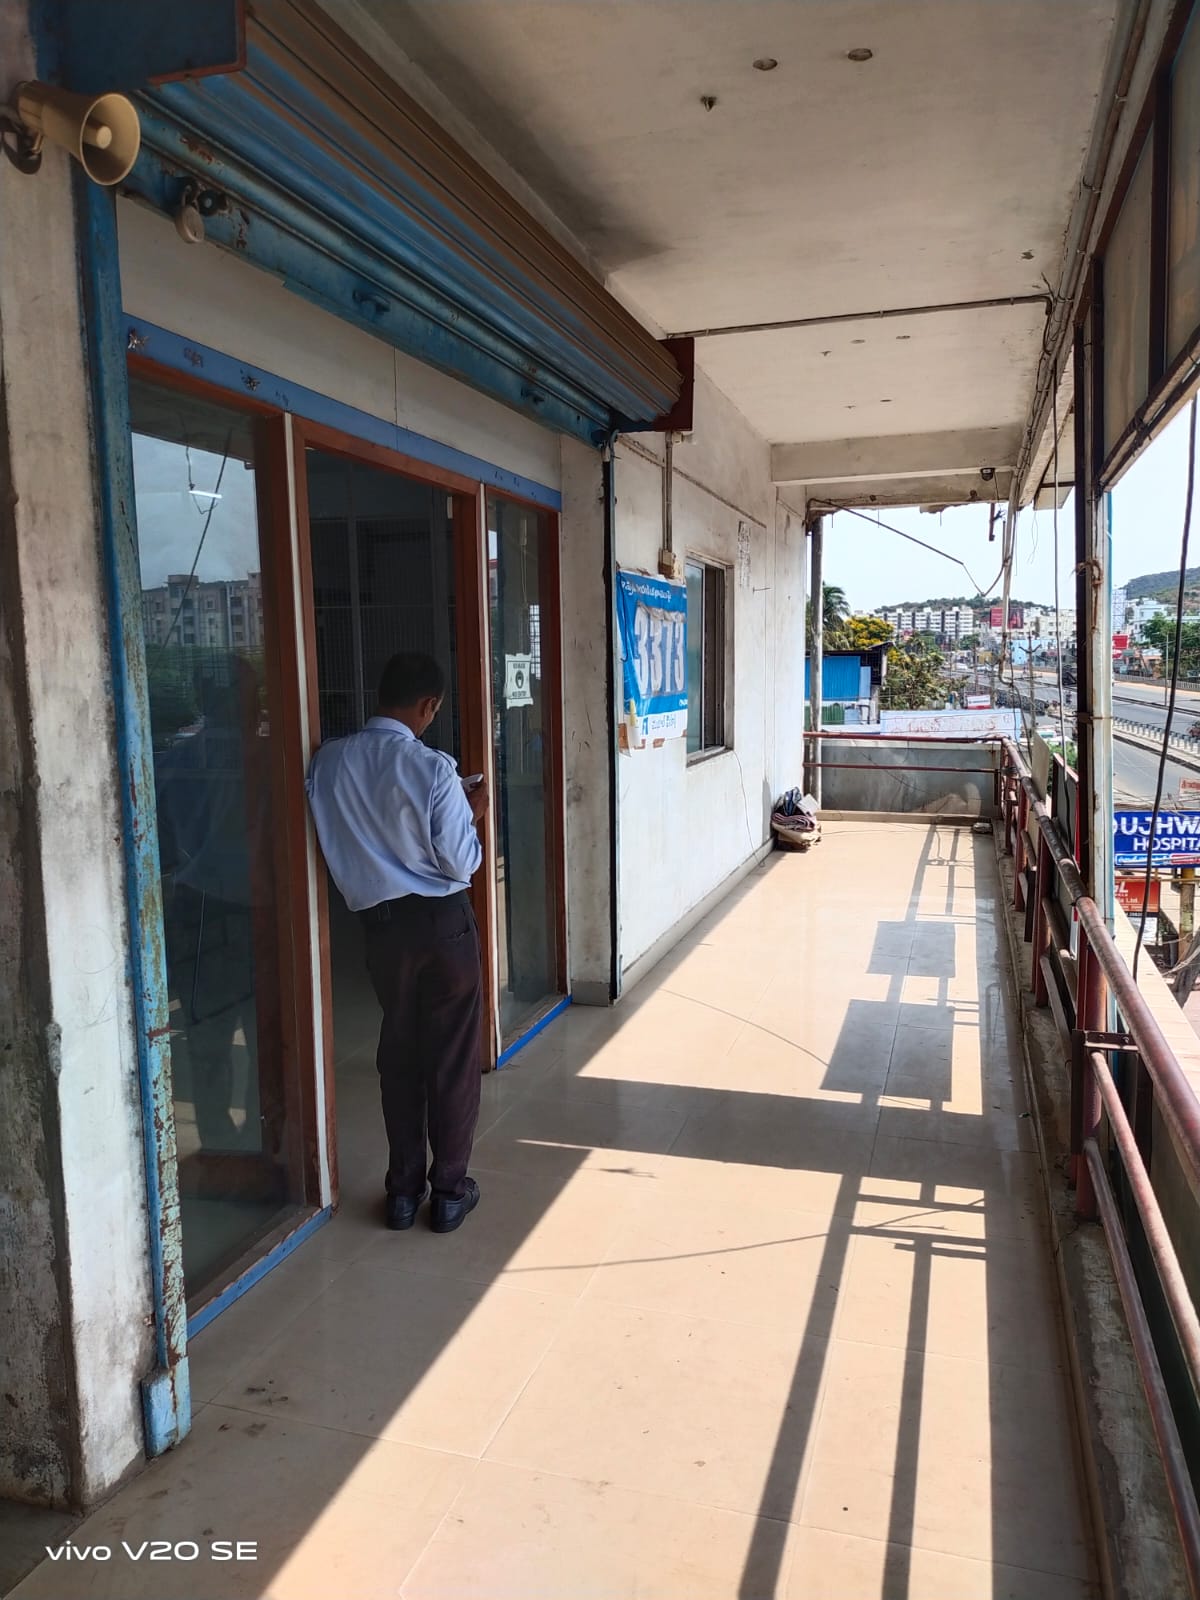 Photos and Videos of Muthoot Fincorp Gold Loan in Madhurawada, Visakhapatnam